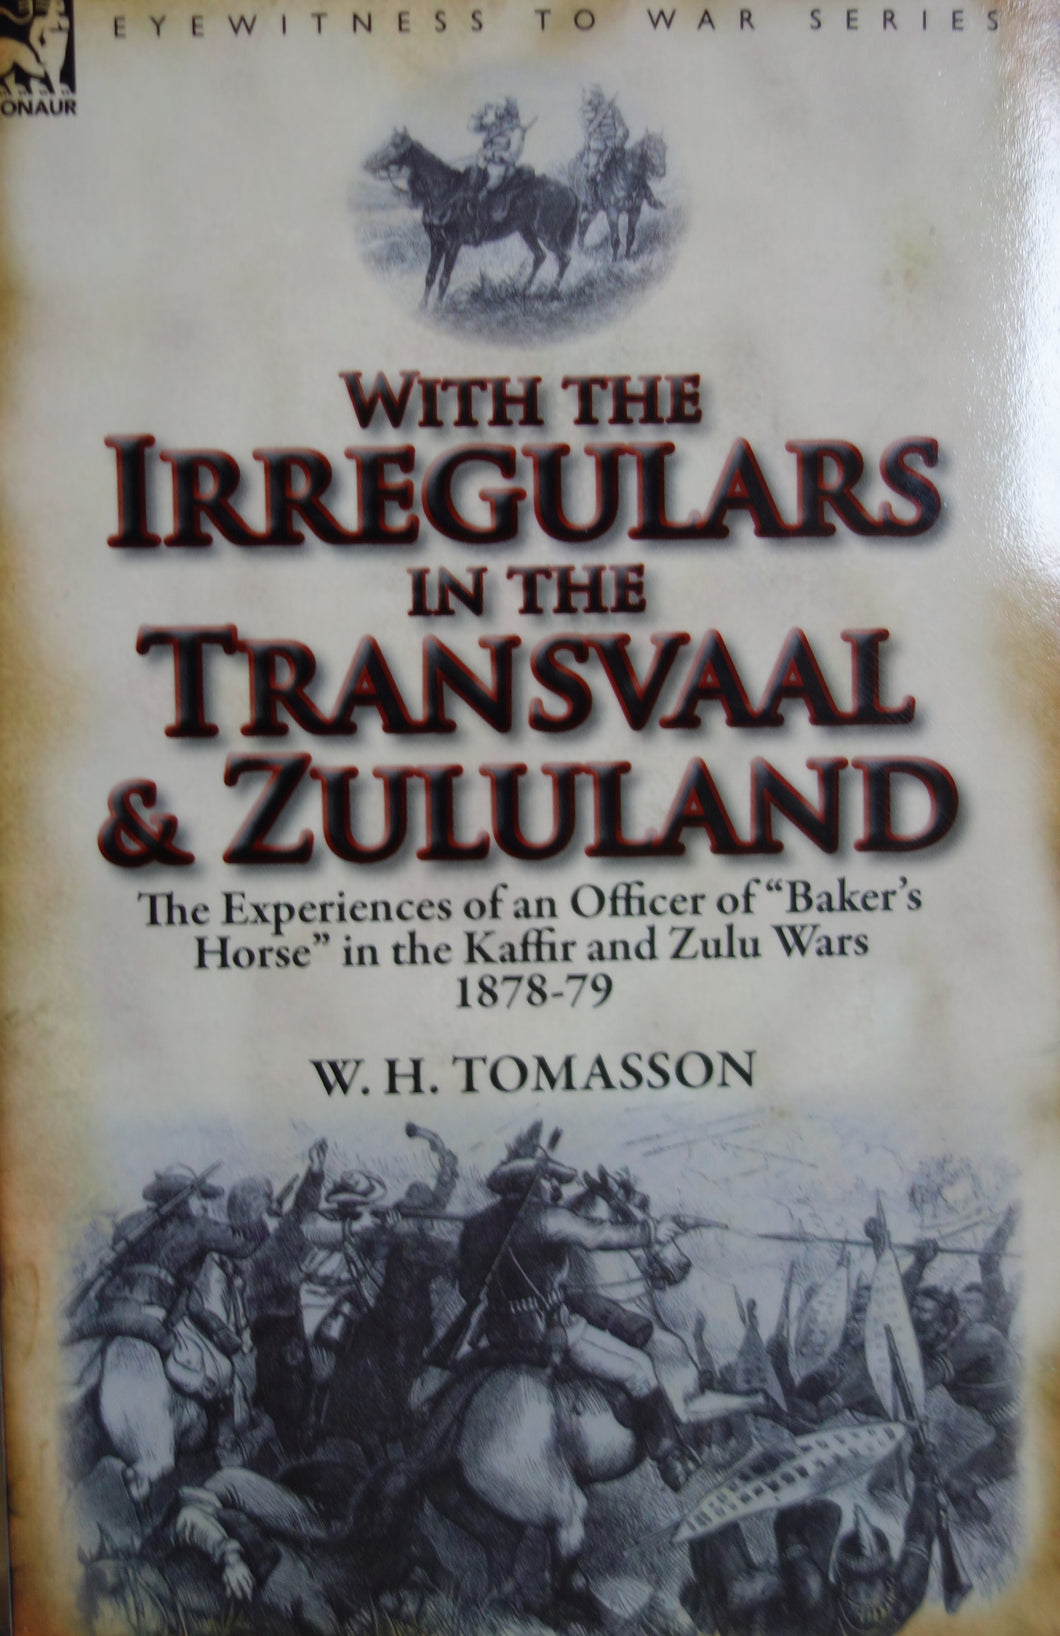 ‘WITH THE IRREGULARS IN THE TRANSVAAL’ By W. H. TOMASSON